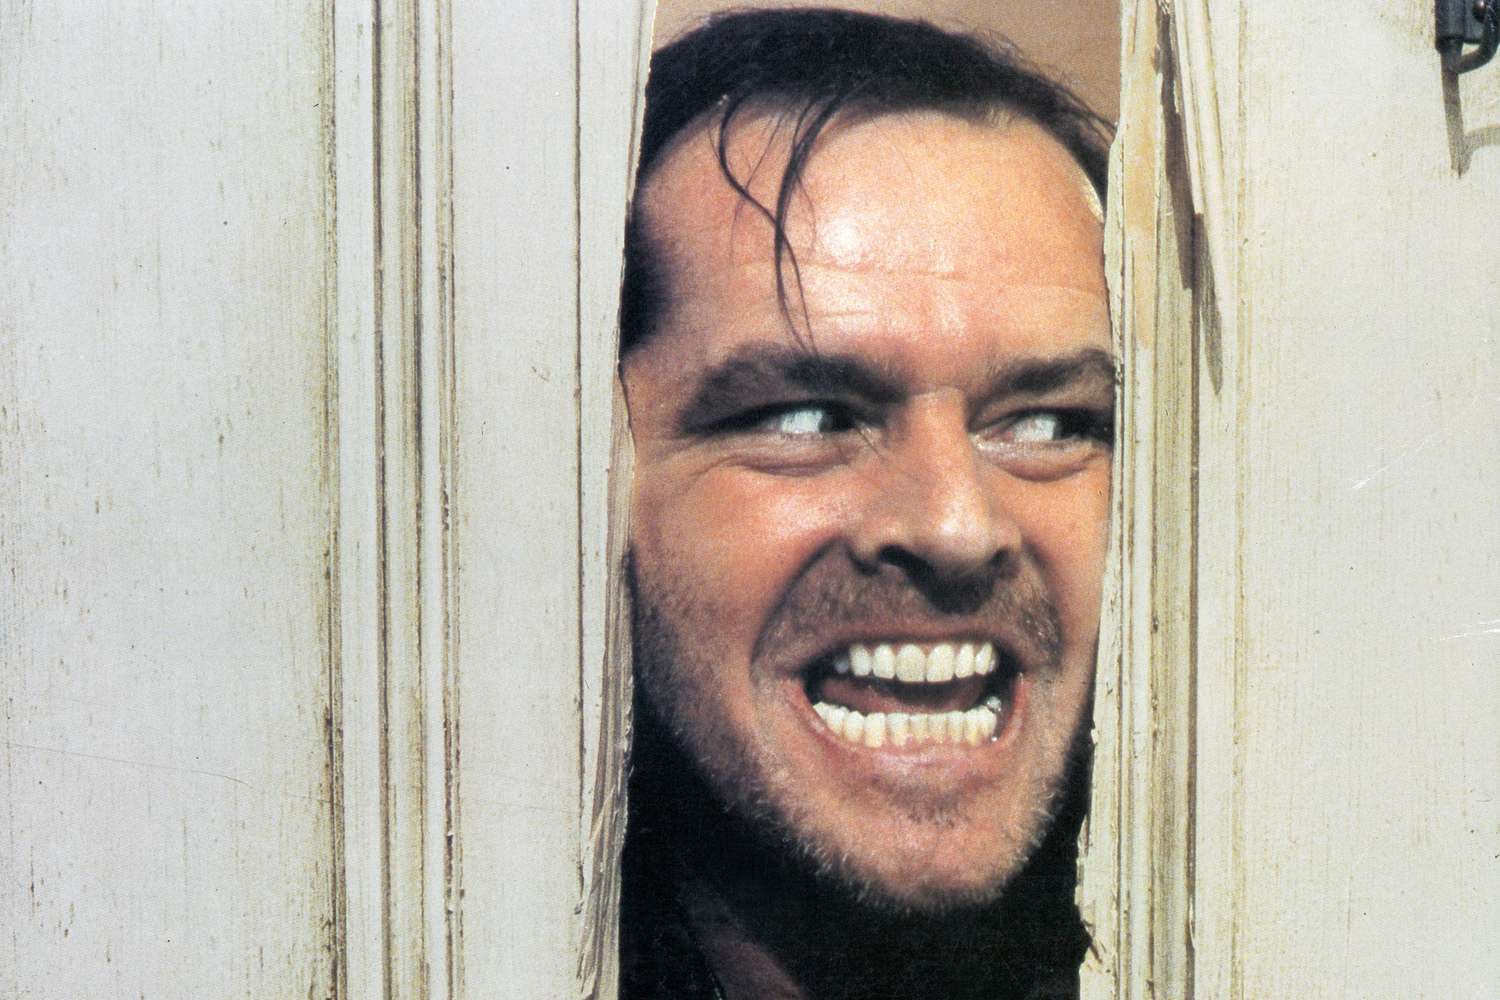 Jack Nicholson peering through axed in door in lobby card for the film 'The Shining', 1980. 